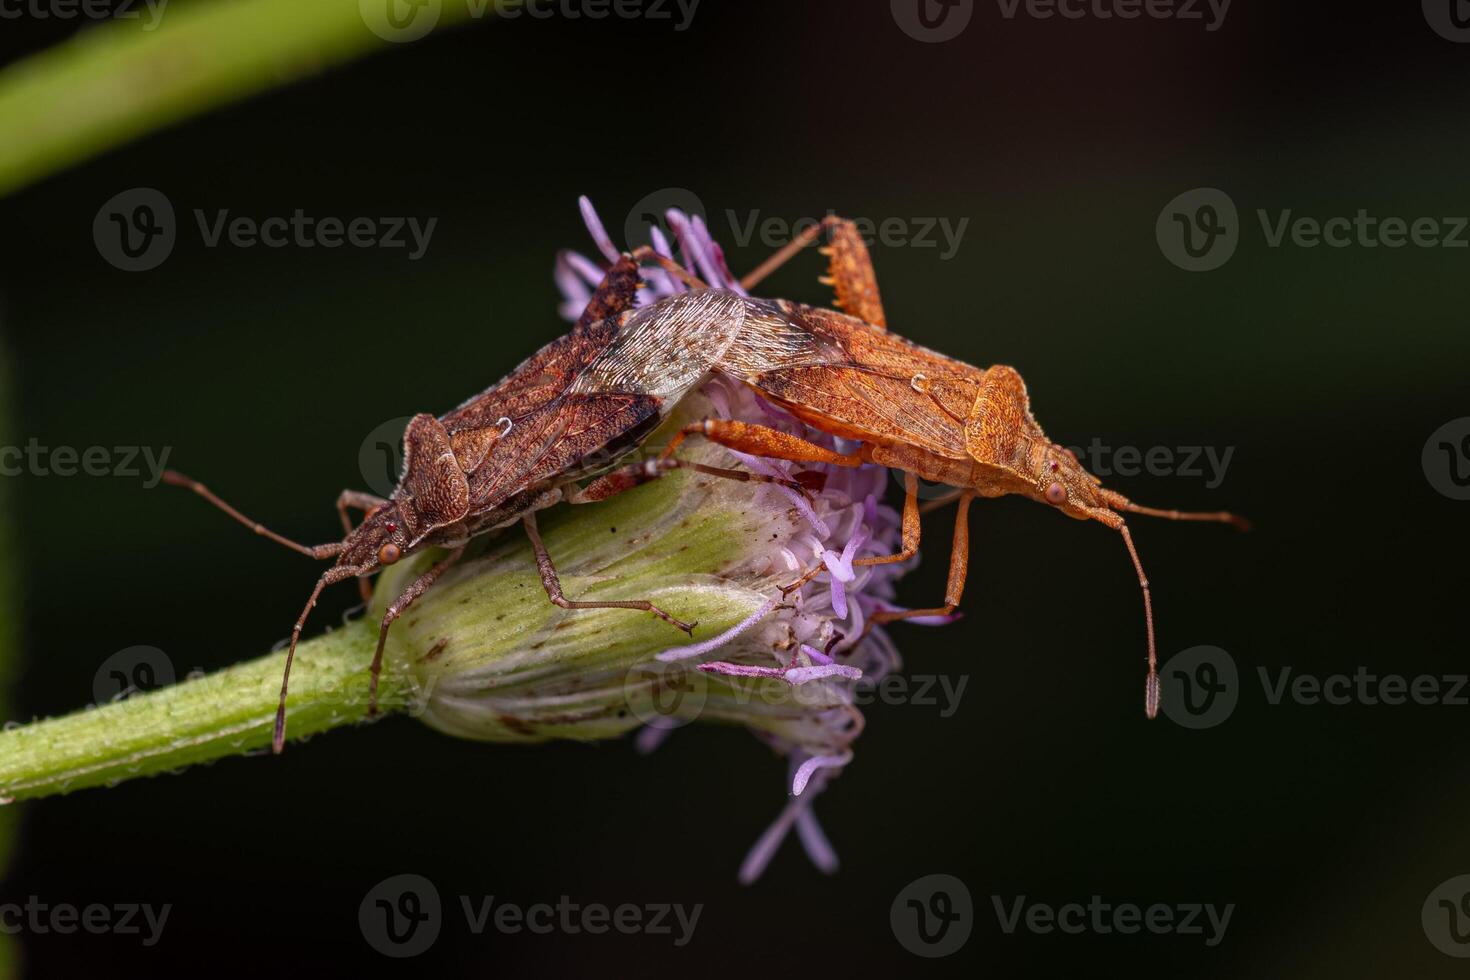 Adult Scentless Plant Bugs coupling photo